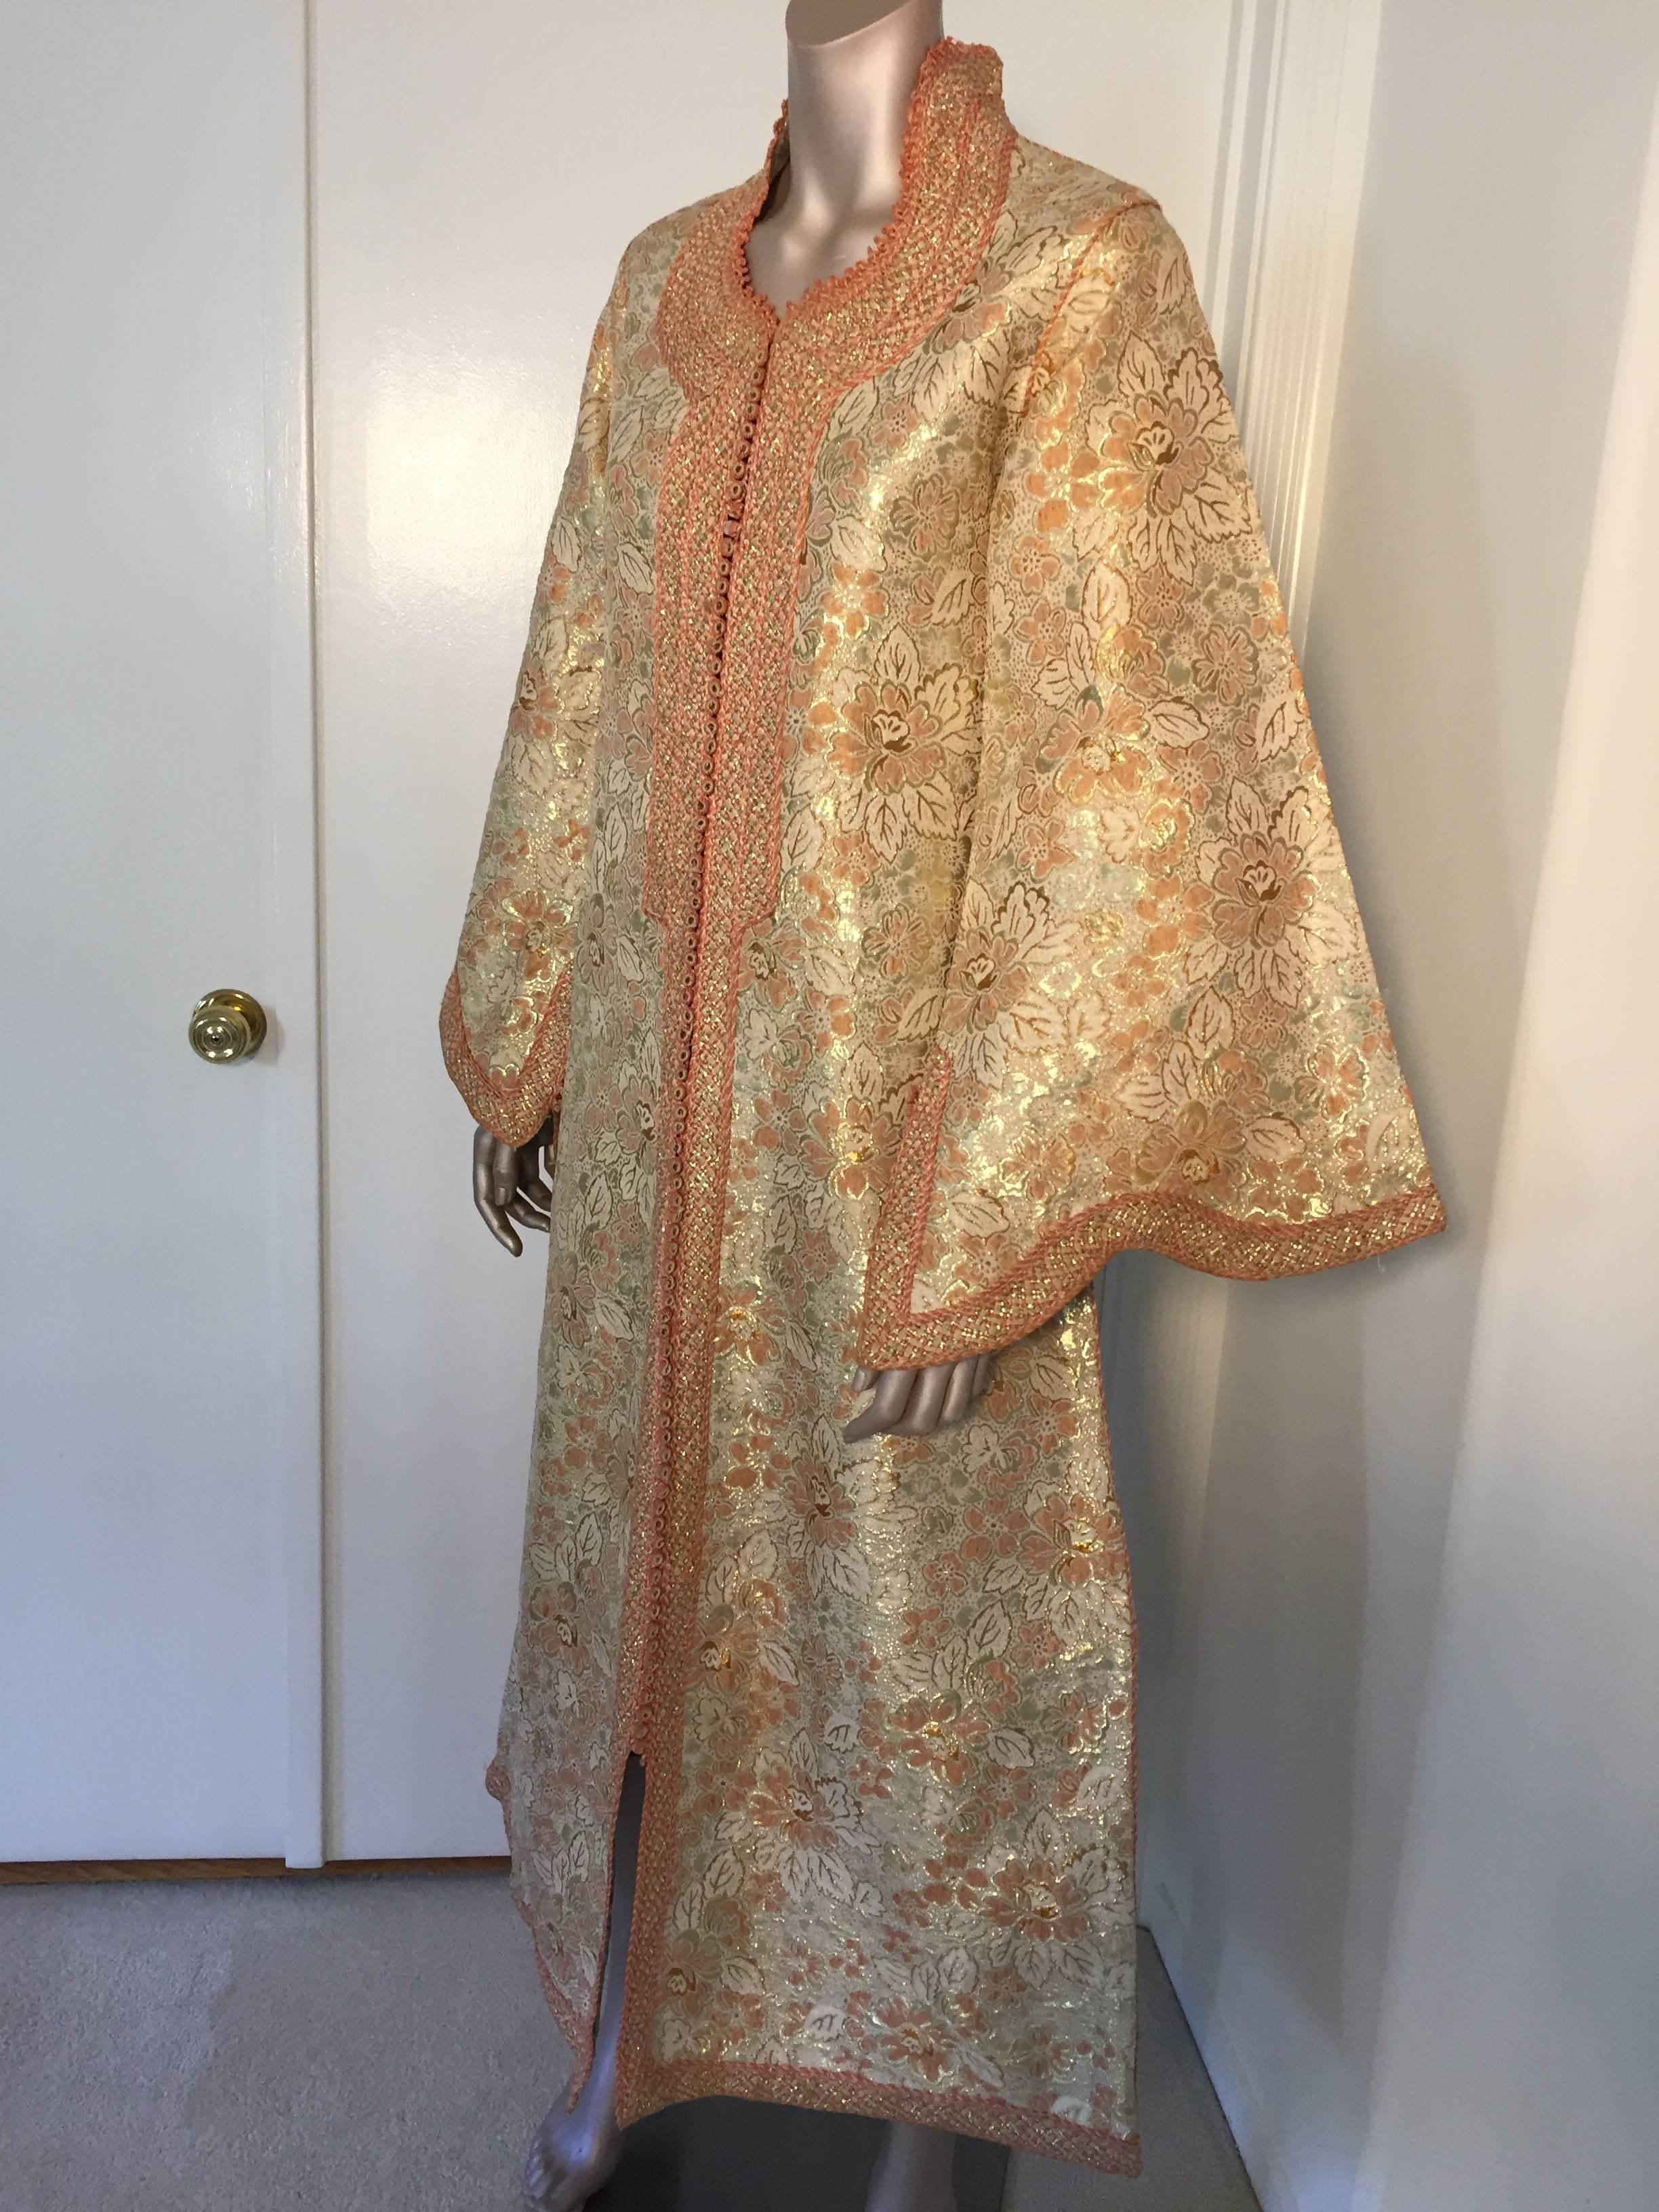 Elegant Moroccan caftan gold and orange metallic,
circa 1970s.
This long maxi dress vintage kaftan is embroidered and embellished entirely by hand.
Gorgeous Vintage hostess gown, gold brocade Kaftan circa 1970s.
Exotic oriental floral long maxi